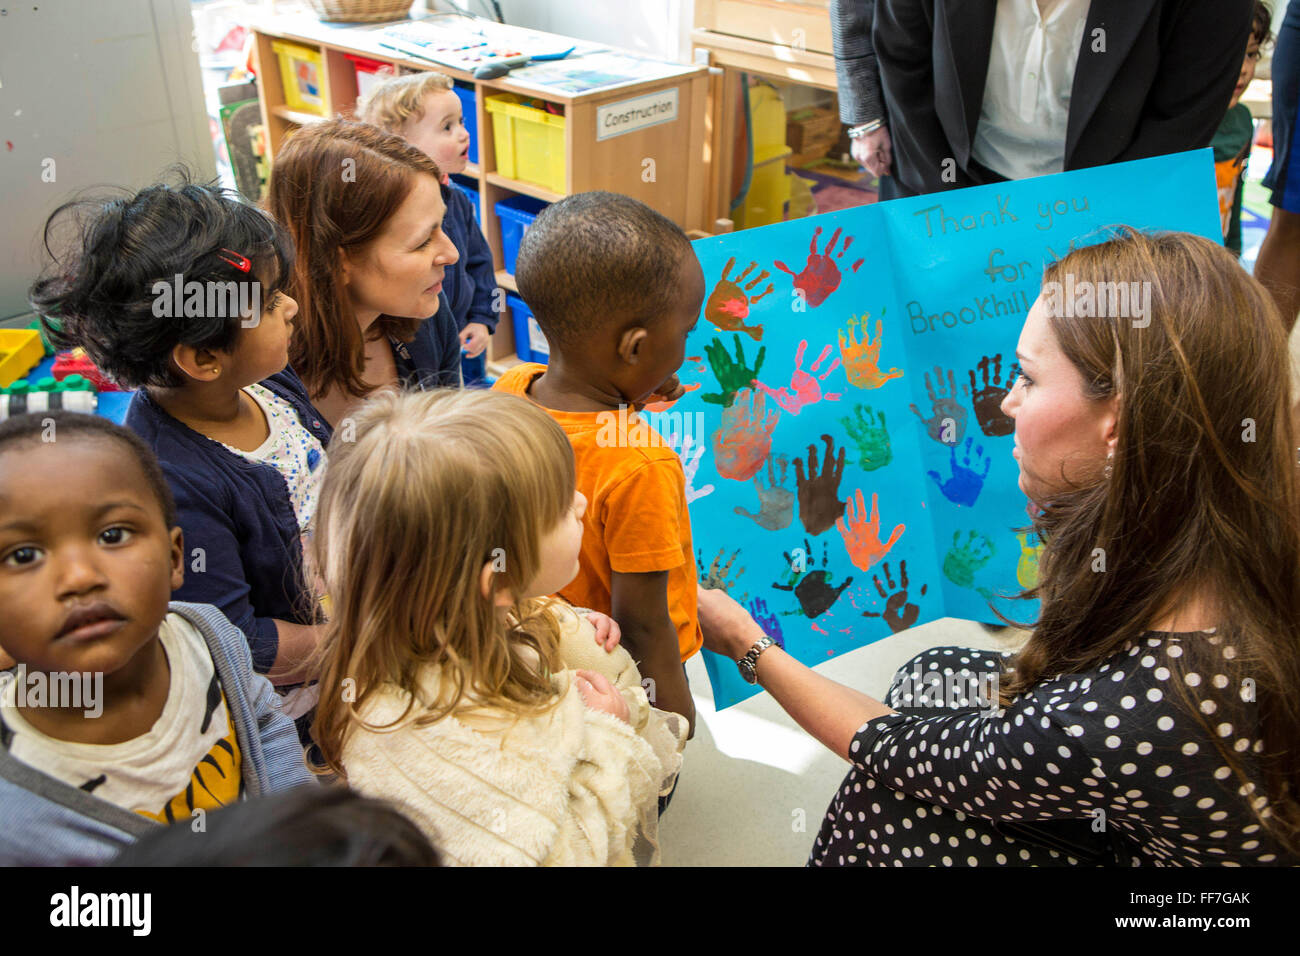 Her Royal Highness The Duchess of Cambridge chatting to parents and staff at Brookhill Children’s Centre.  A Home-Start project that offers support to children and families. London, UK. Stock Photo